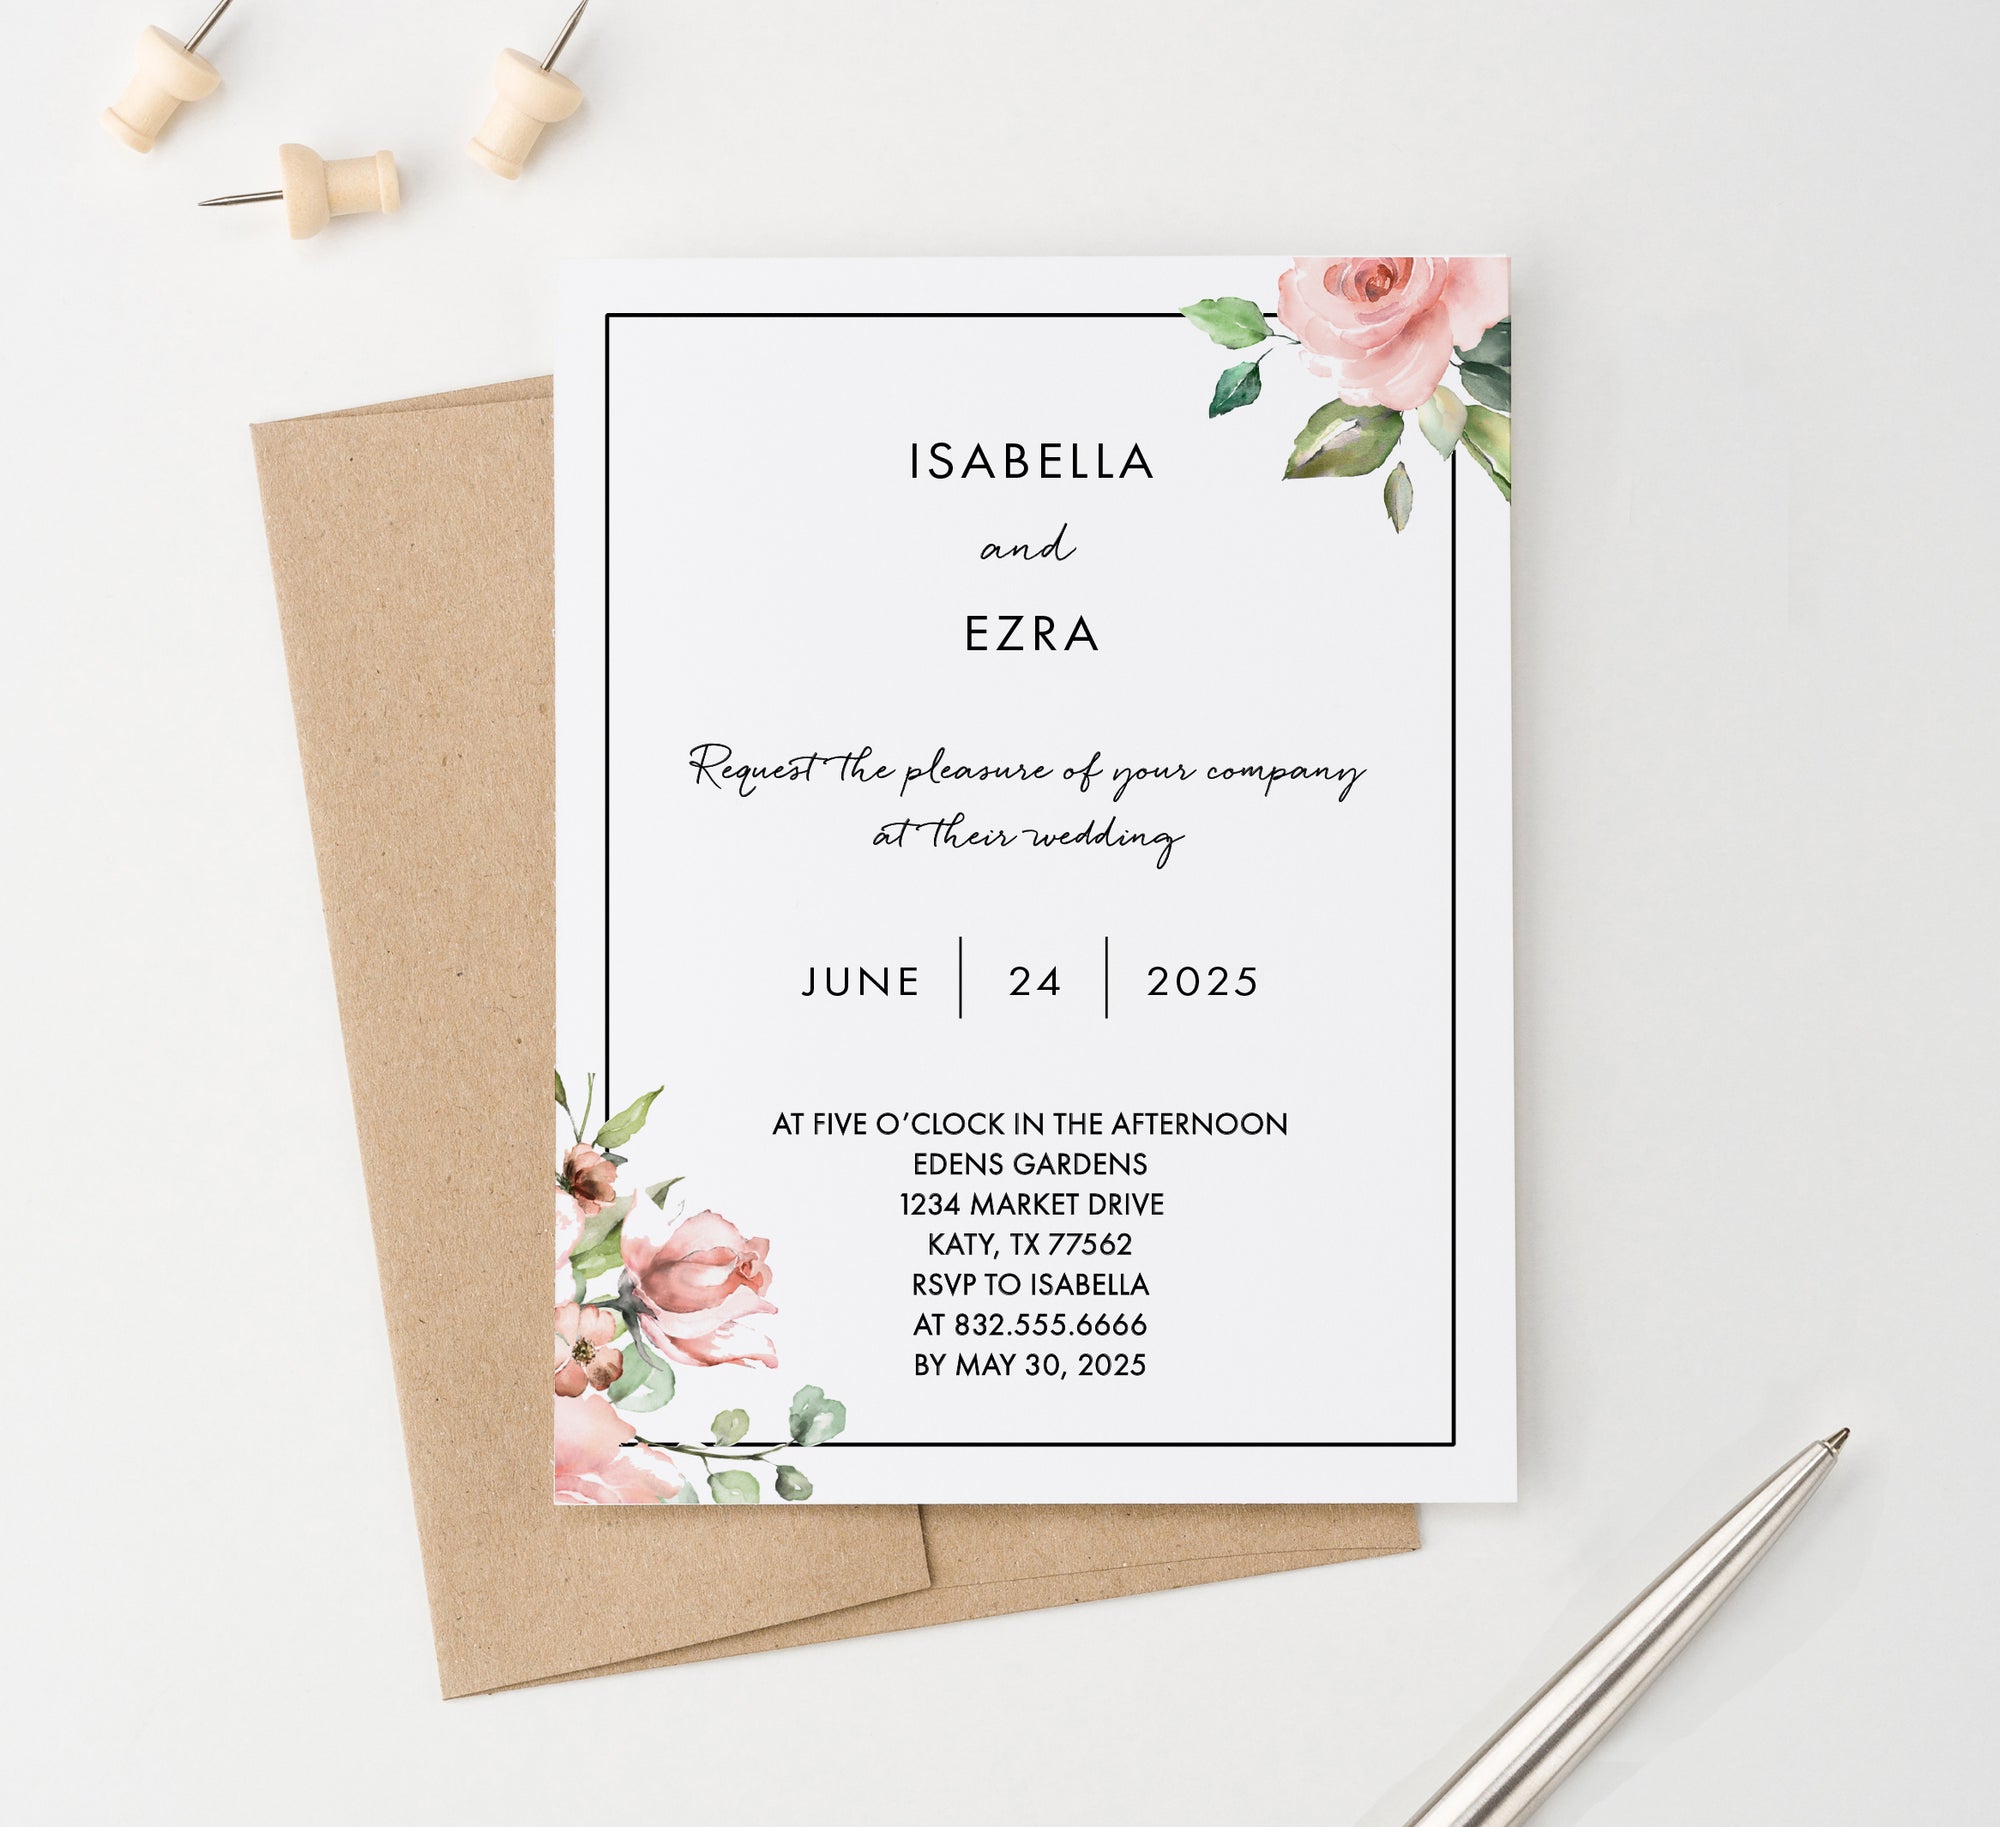 WI027 Personalized Pink Floral Corner Wedding Invitations with Border flowers modern classy classic invites marriage